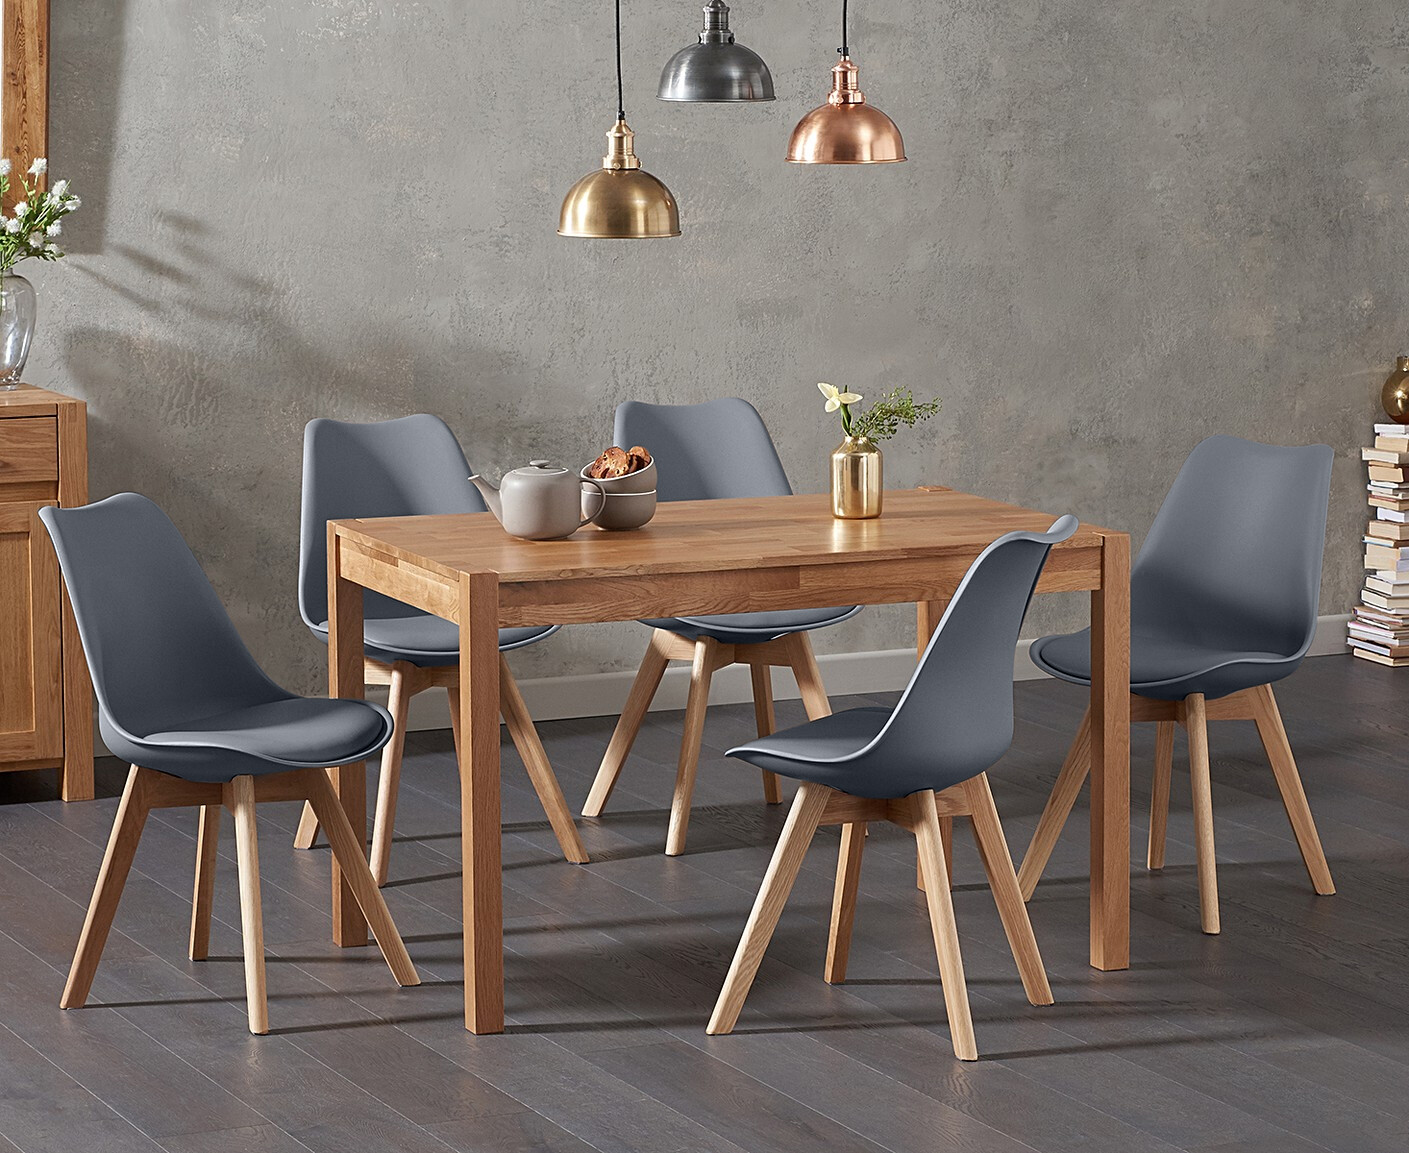 Photo 3 of York 120cm solid oak dining table with 6 dark grey orson chairs